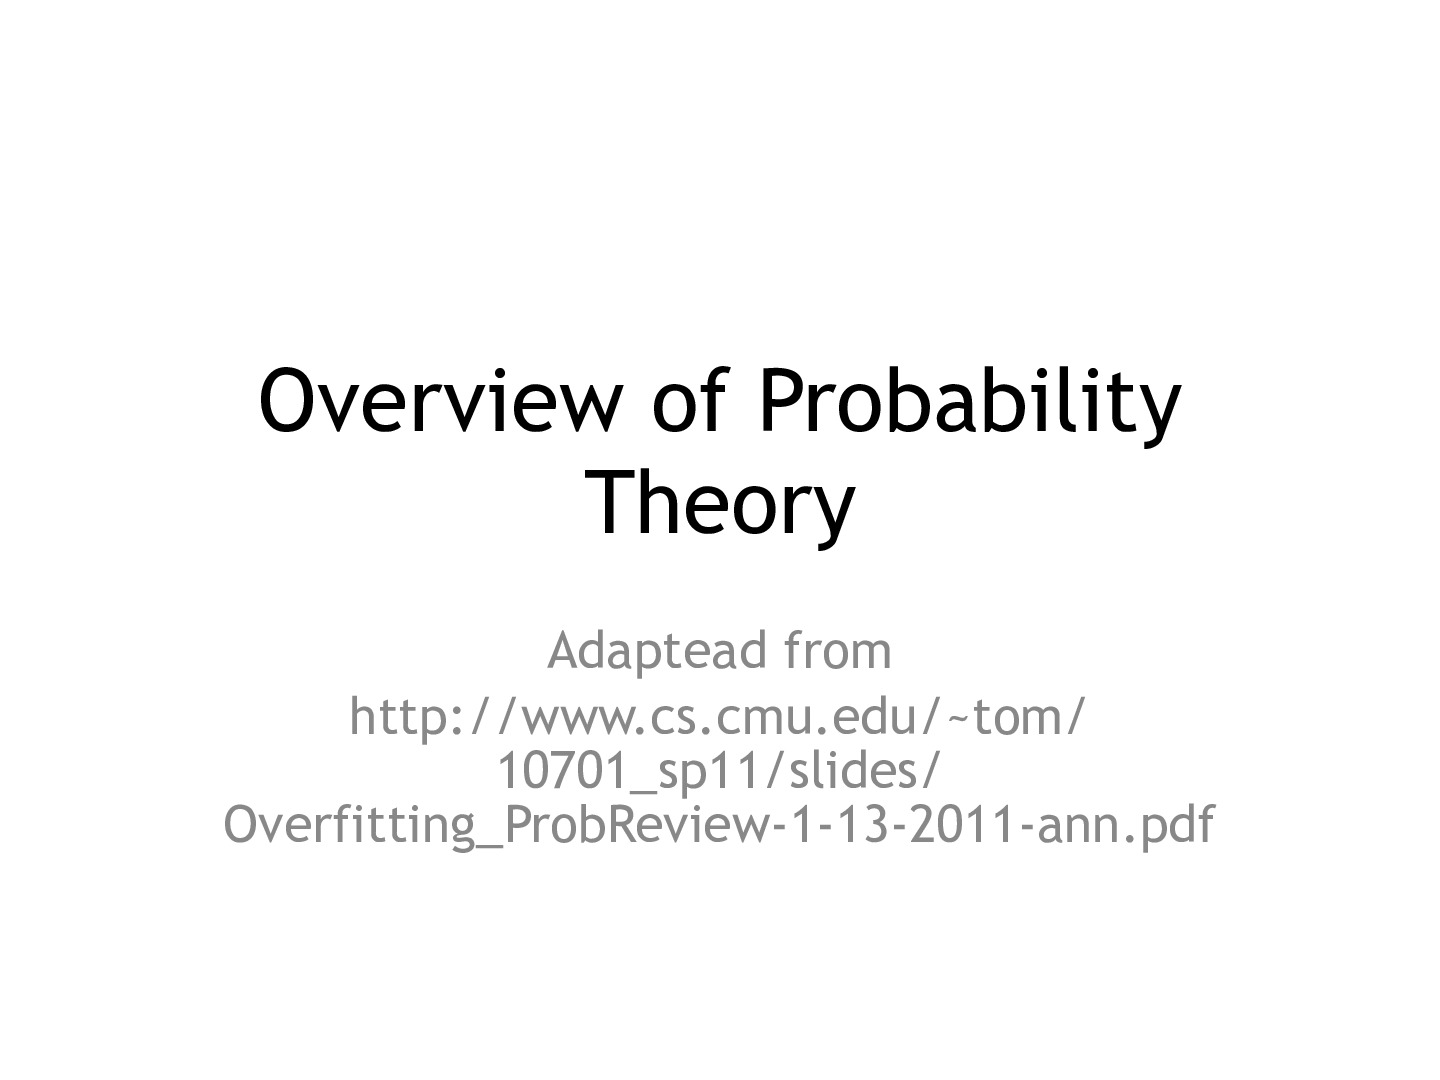 Overview of Probability Theory